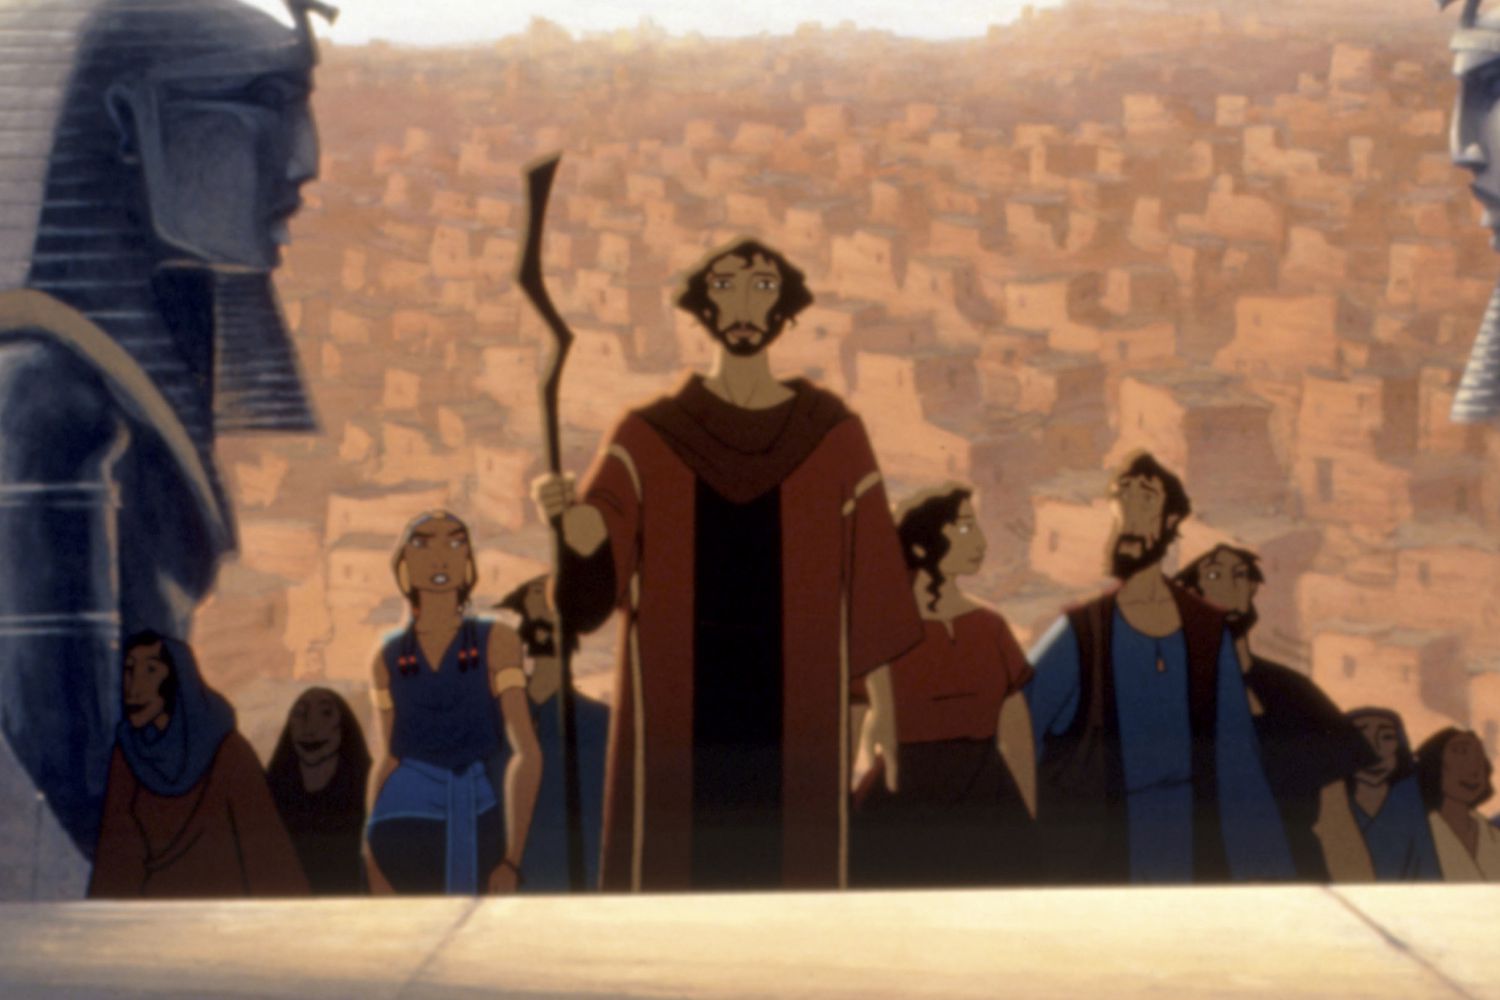 Moses in 'The Prince of Egypt'